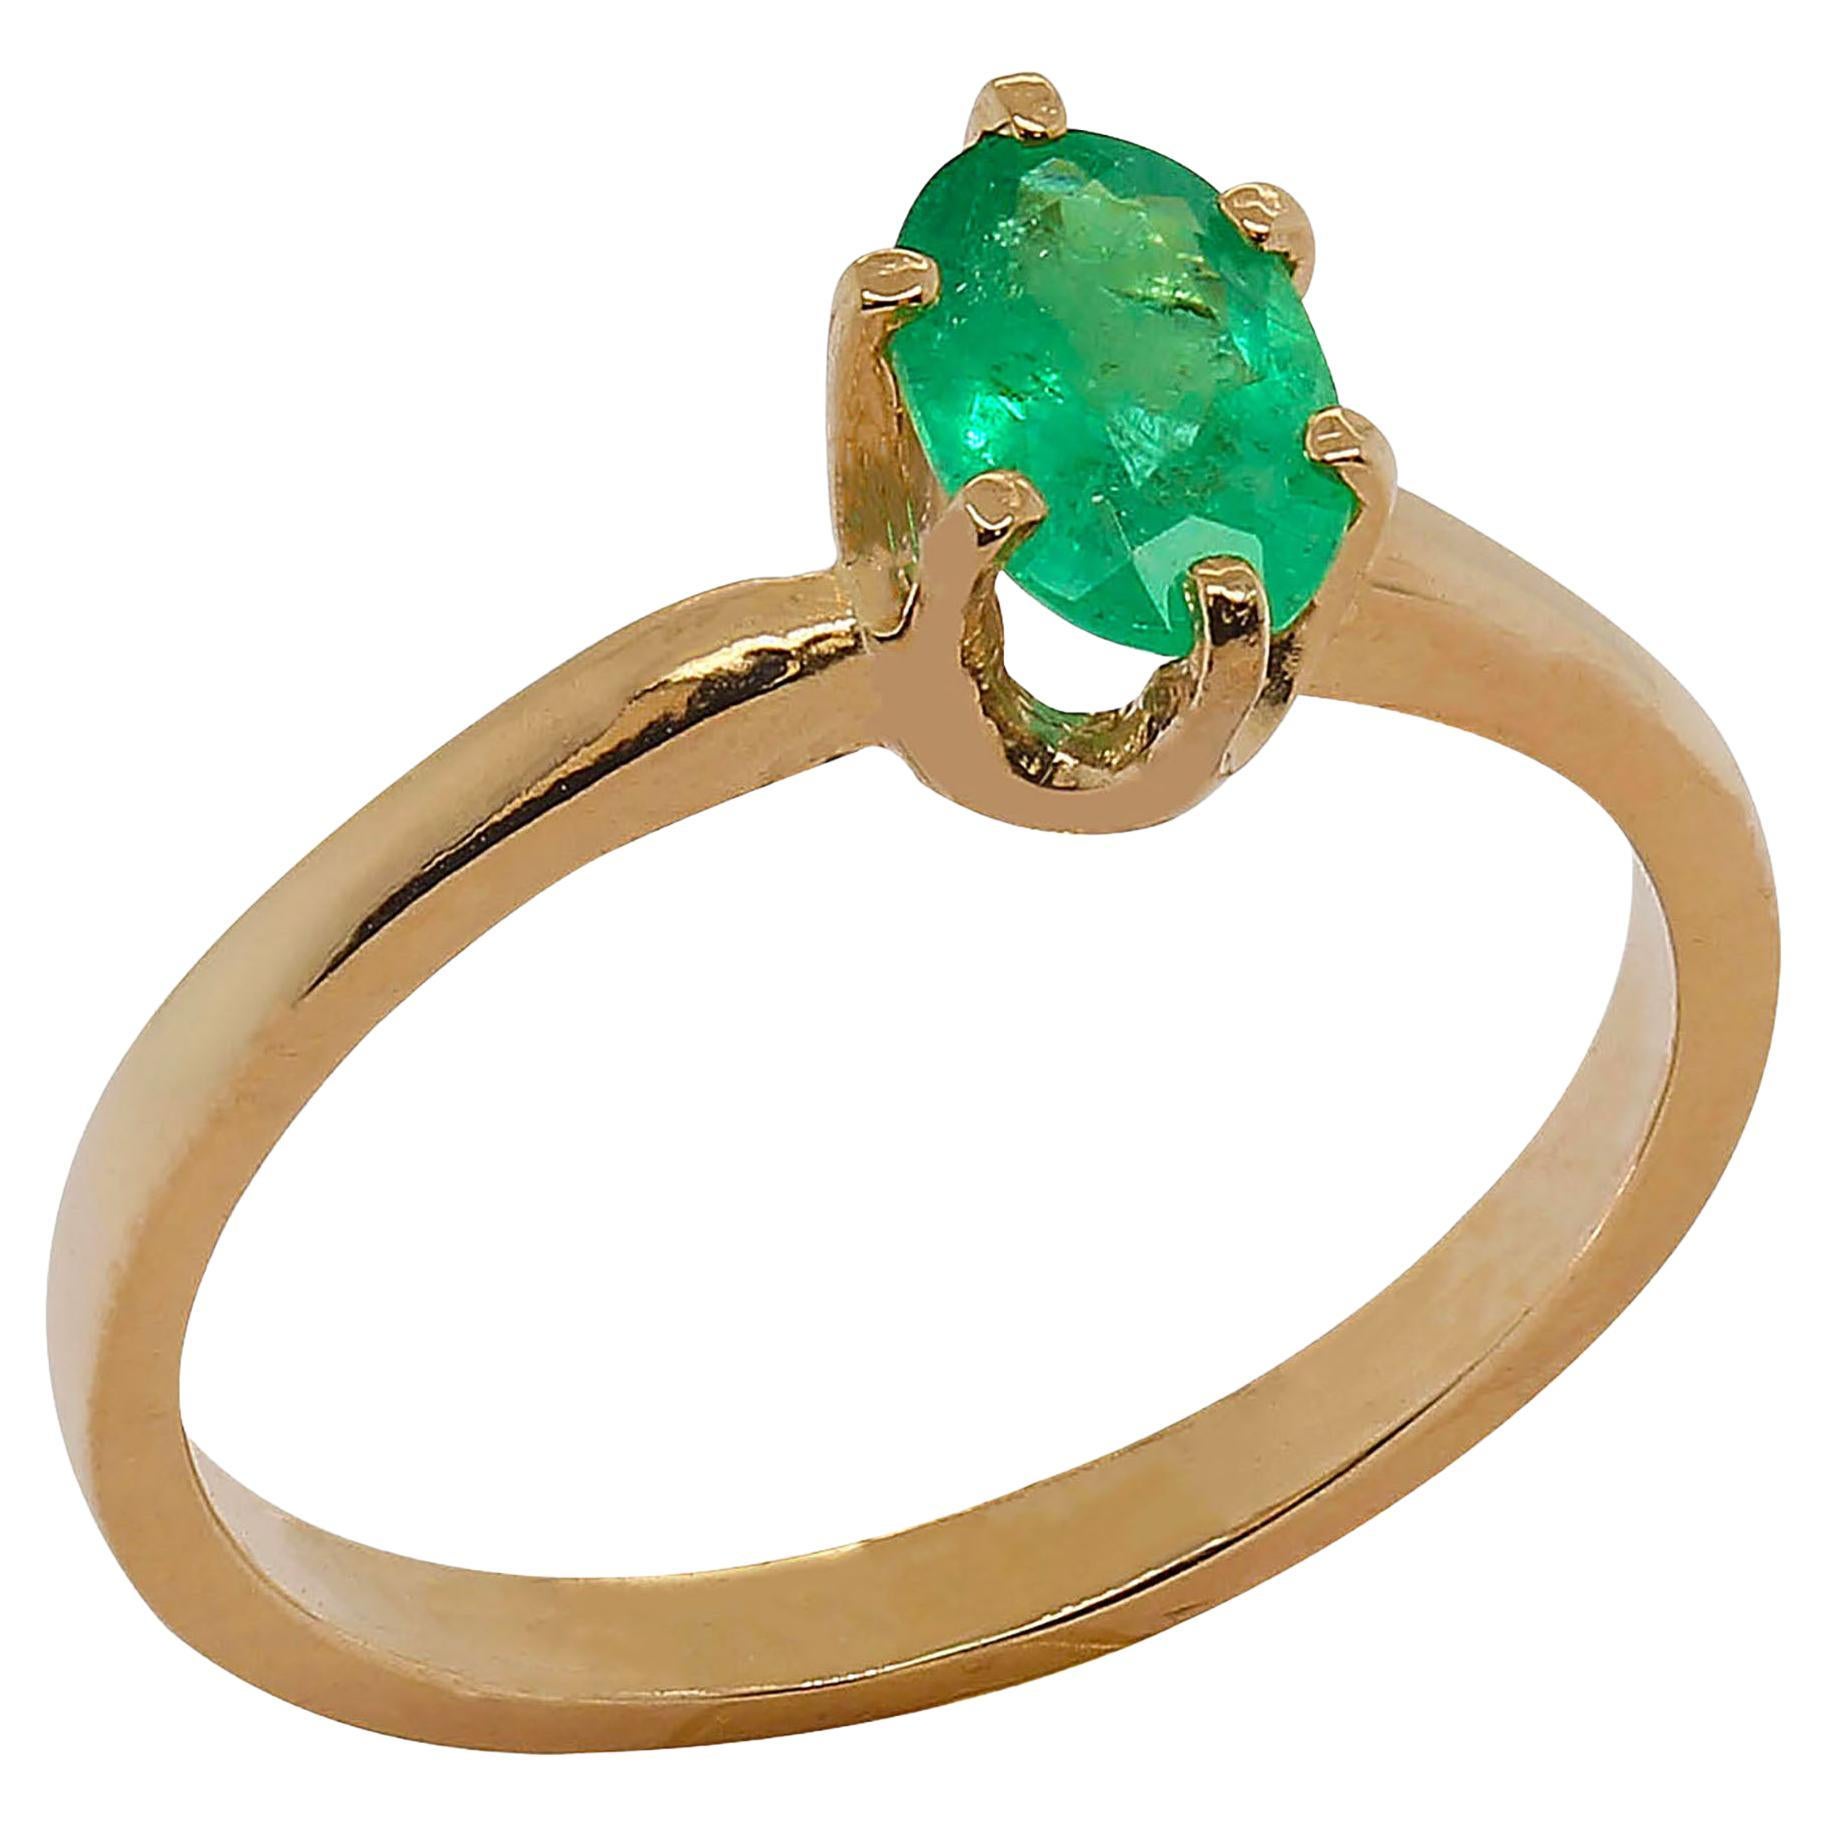 Oval, Brazilian Emerald in classic six prong 14k yellow gold ring.  Beautiful, sparkling Emerald with the bright green 'Brazilian look.'  This is such a lovely Emerald, it has all the typical properties of the best Brazilian Emeralds. O.56 carats.